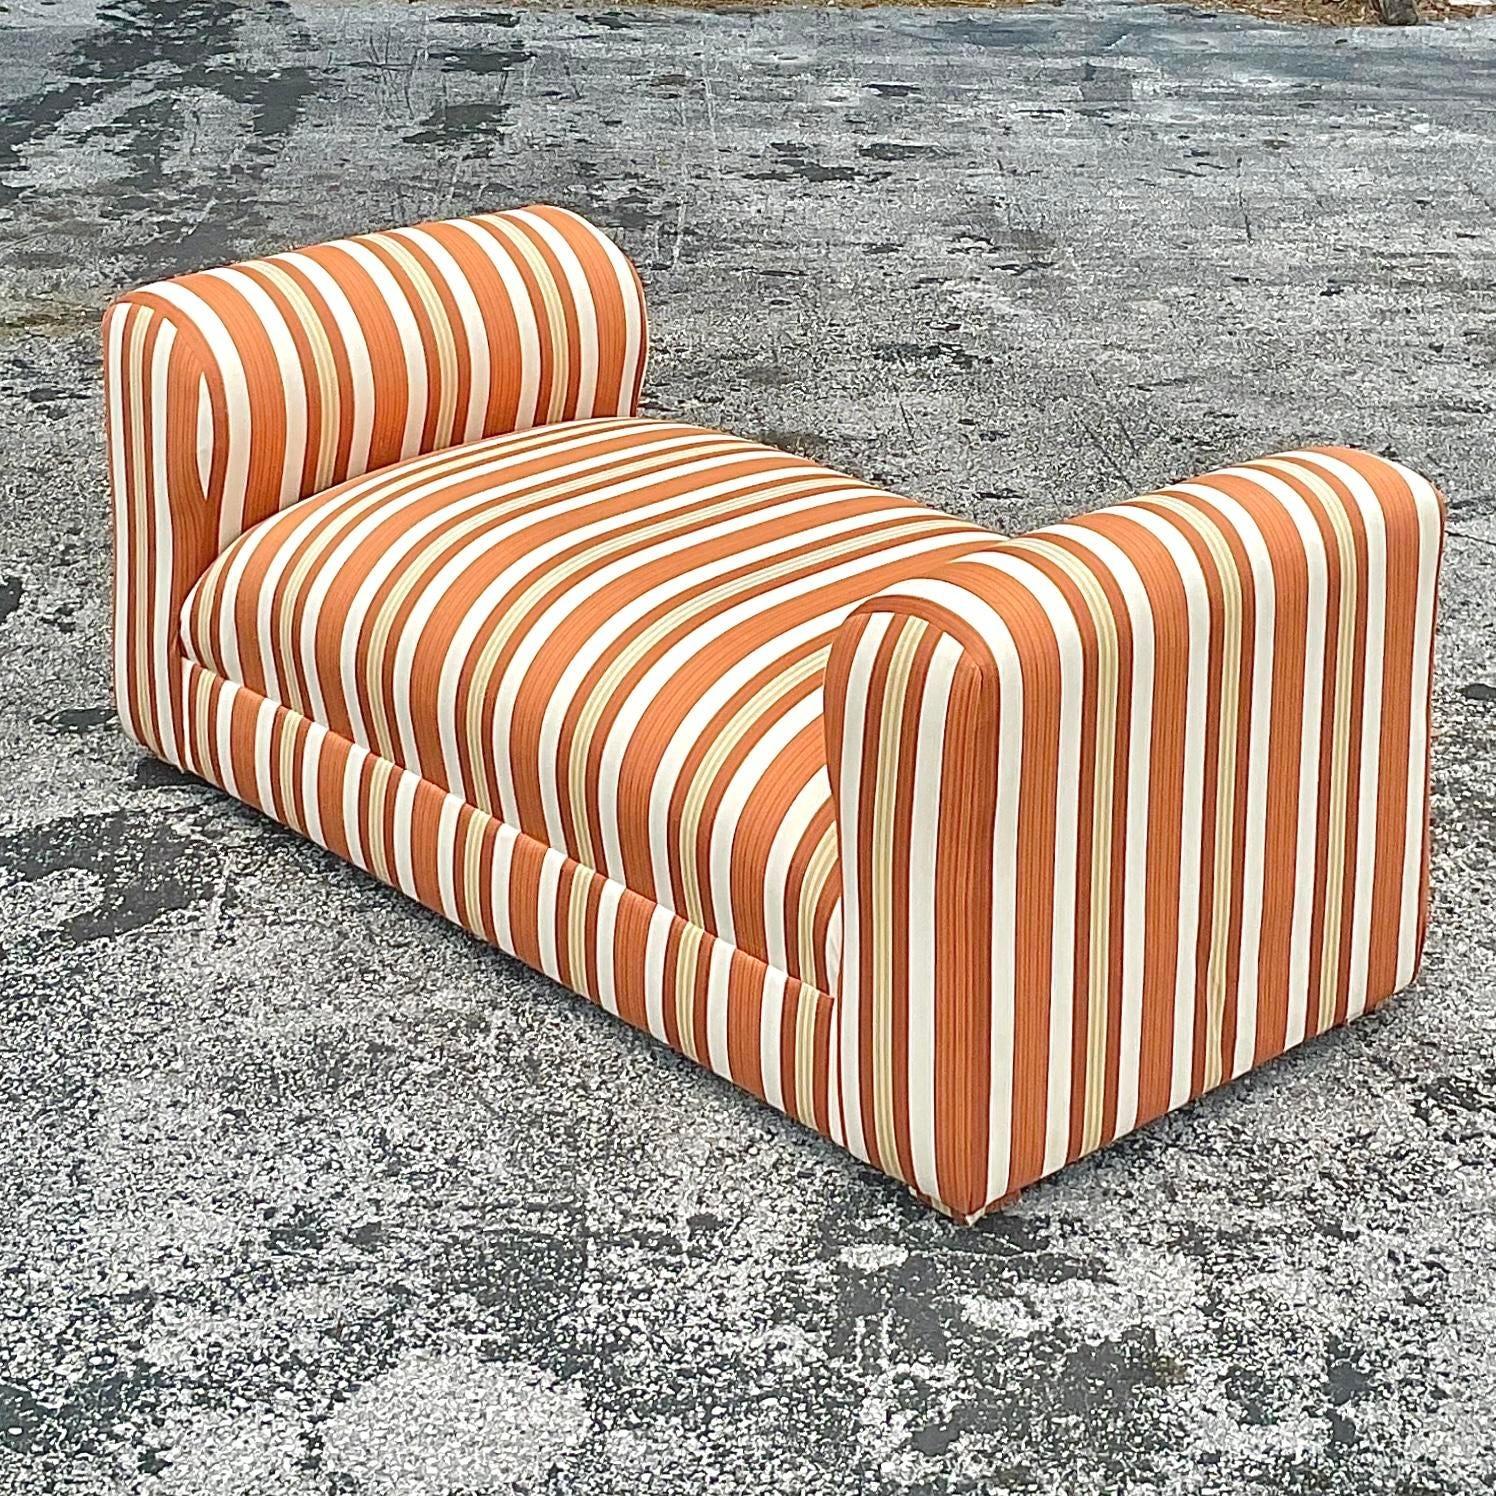 Upholstery Late 20th Century Vintage Regency Striped Settee For Sale